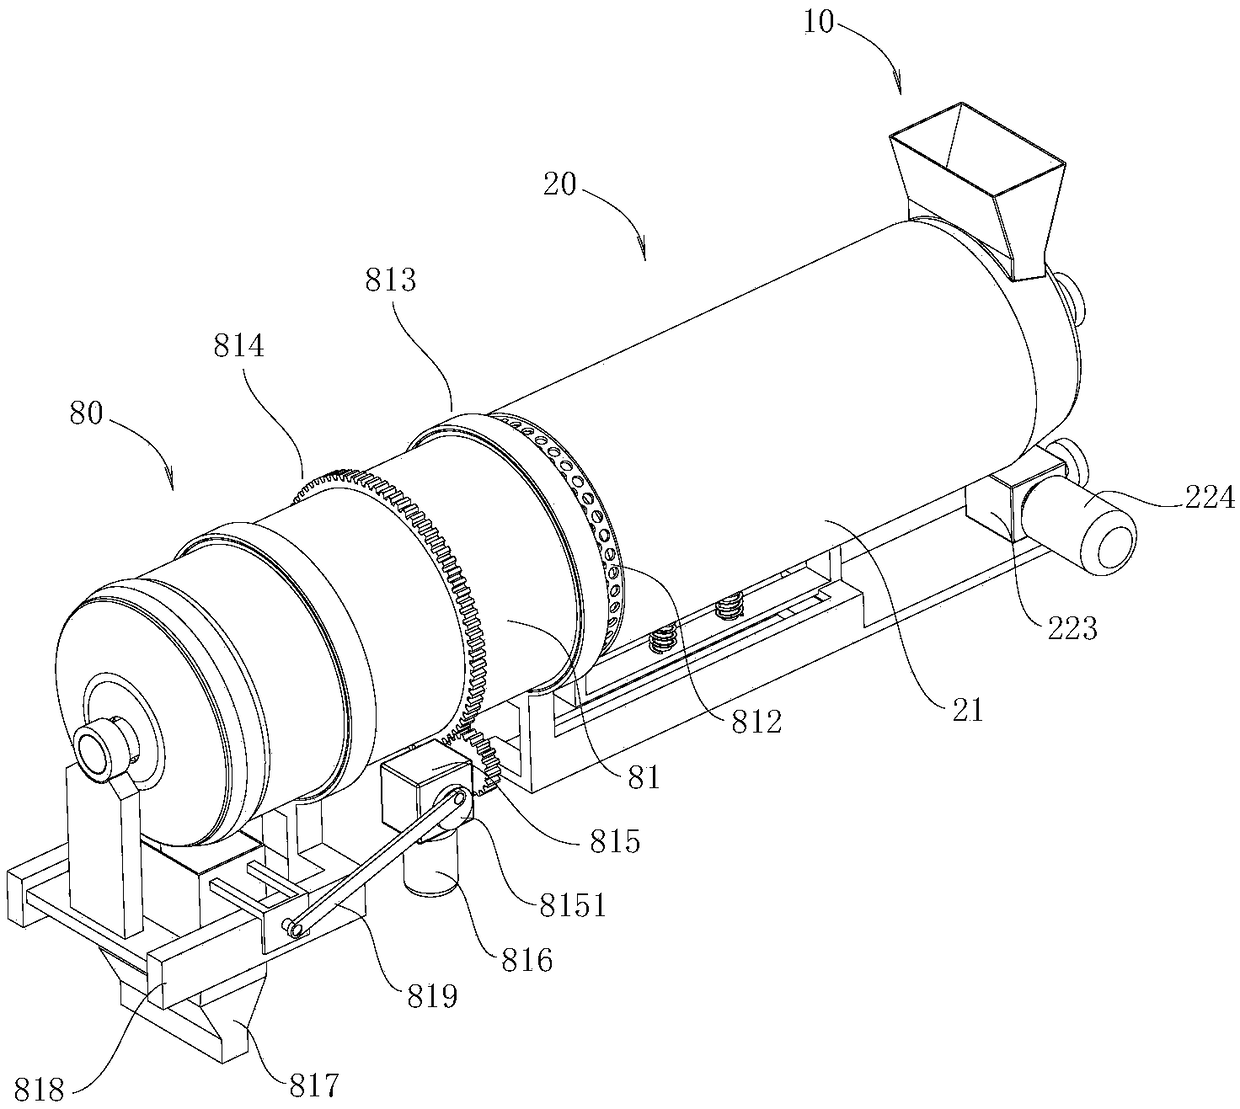 Shell and meat separating device